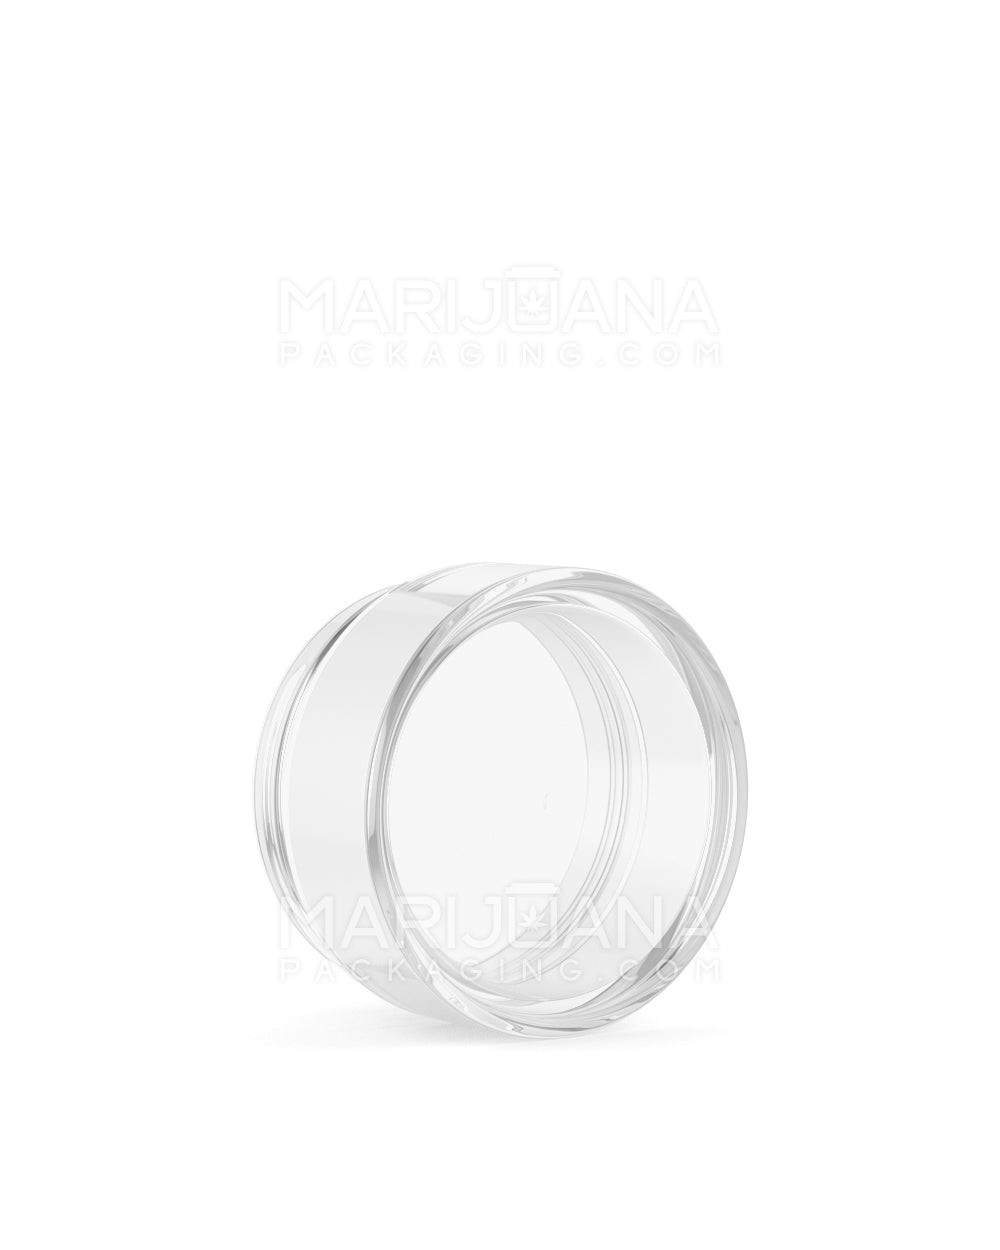 Clear Concentrate Containers w/ Screw Top Cap | 15mL - Plastic - 200 Count - 7